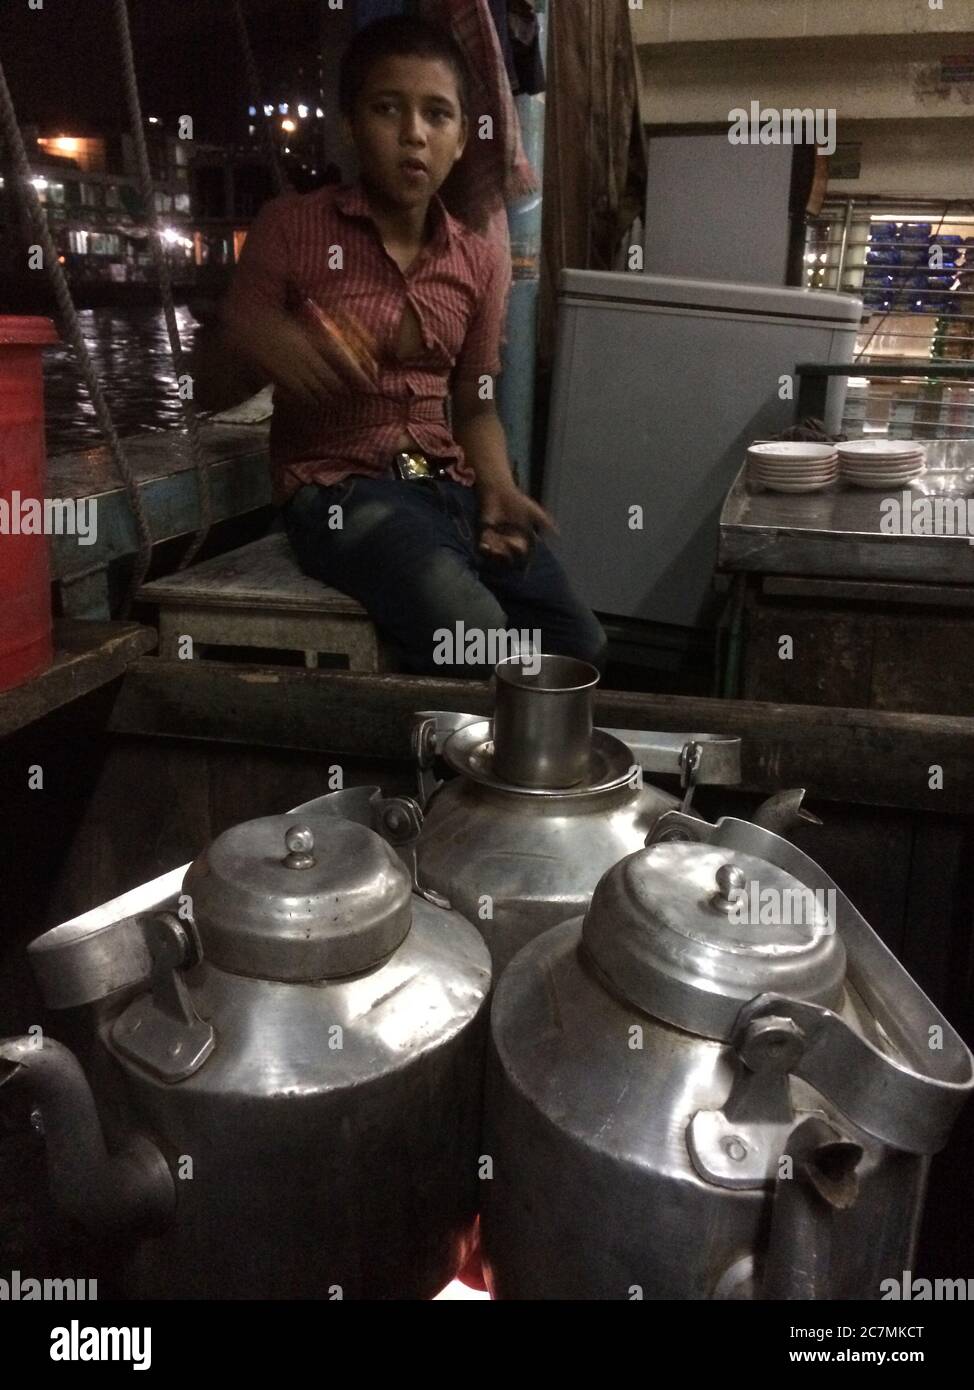 Boy, working a helper in a busy teashop keeps an eye on the boiling tea pots full of hot water in Manikganj, Bangladesh. These open-air shops are constantly serving tea to a string of customers who arrive for refreshment and to catch up on the town gossip. Stock Photo